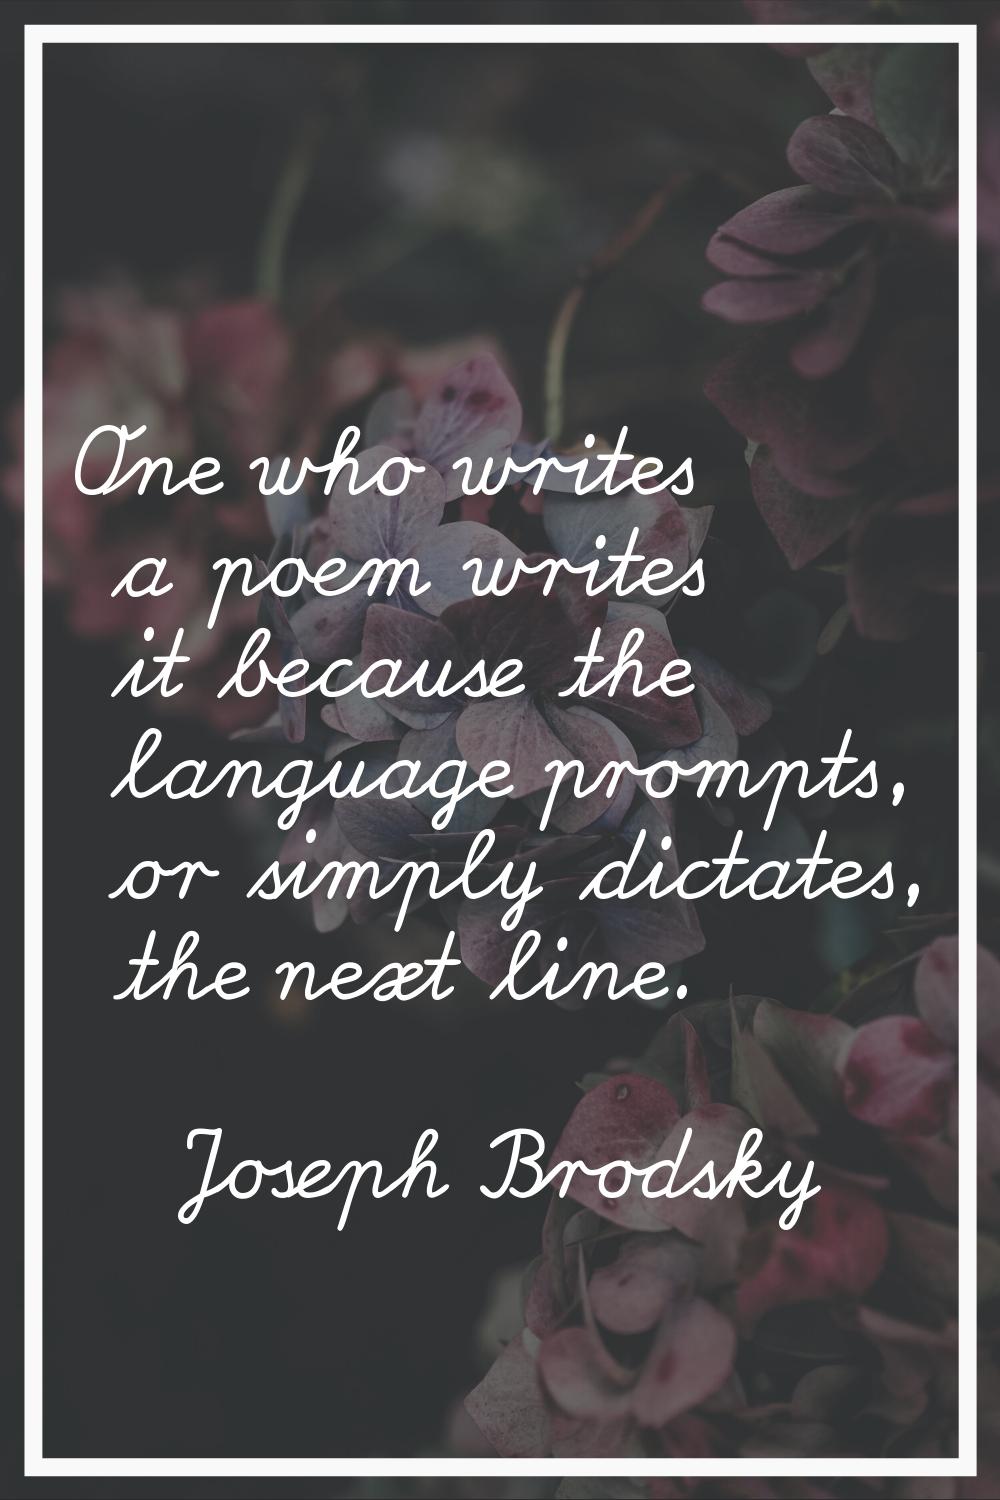 One who writes a poem writes it because the language prompts, or simply dictates, the next line.